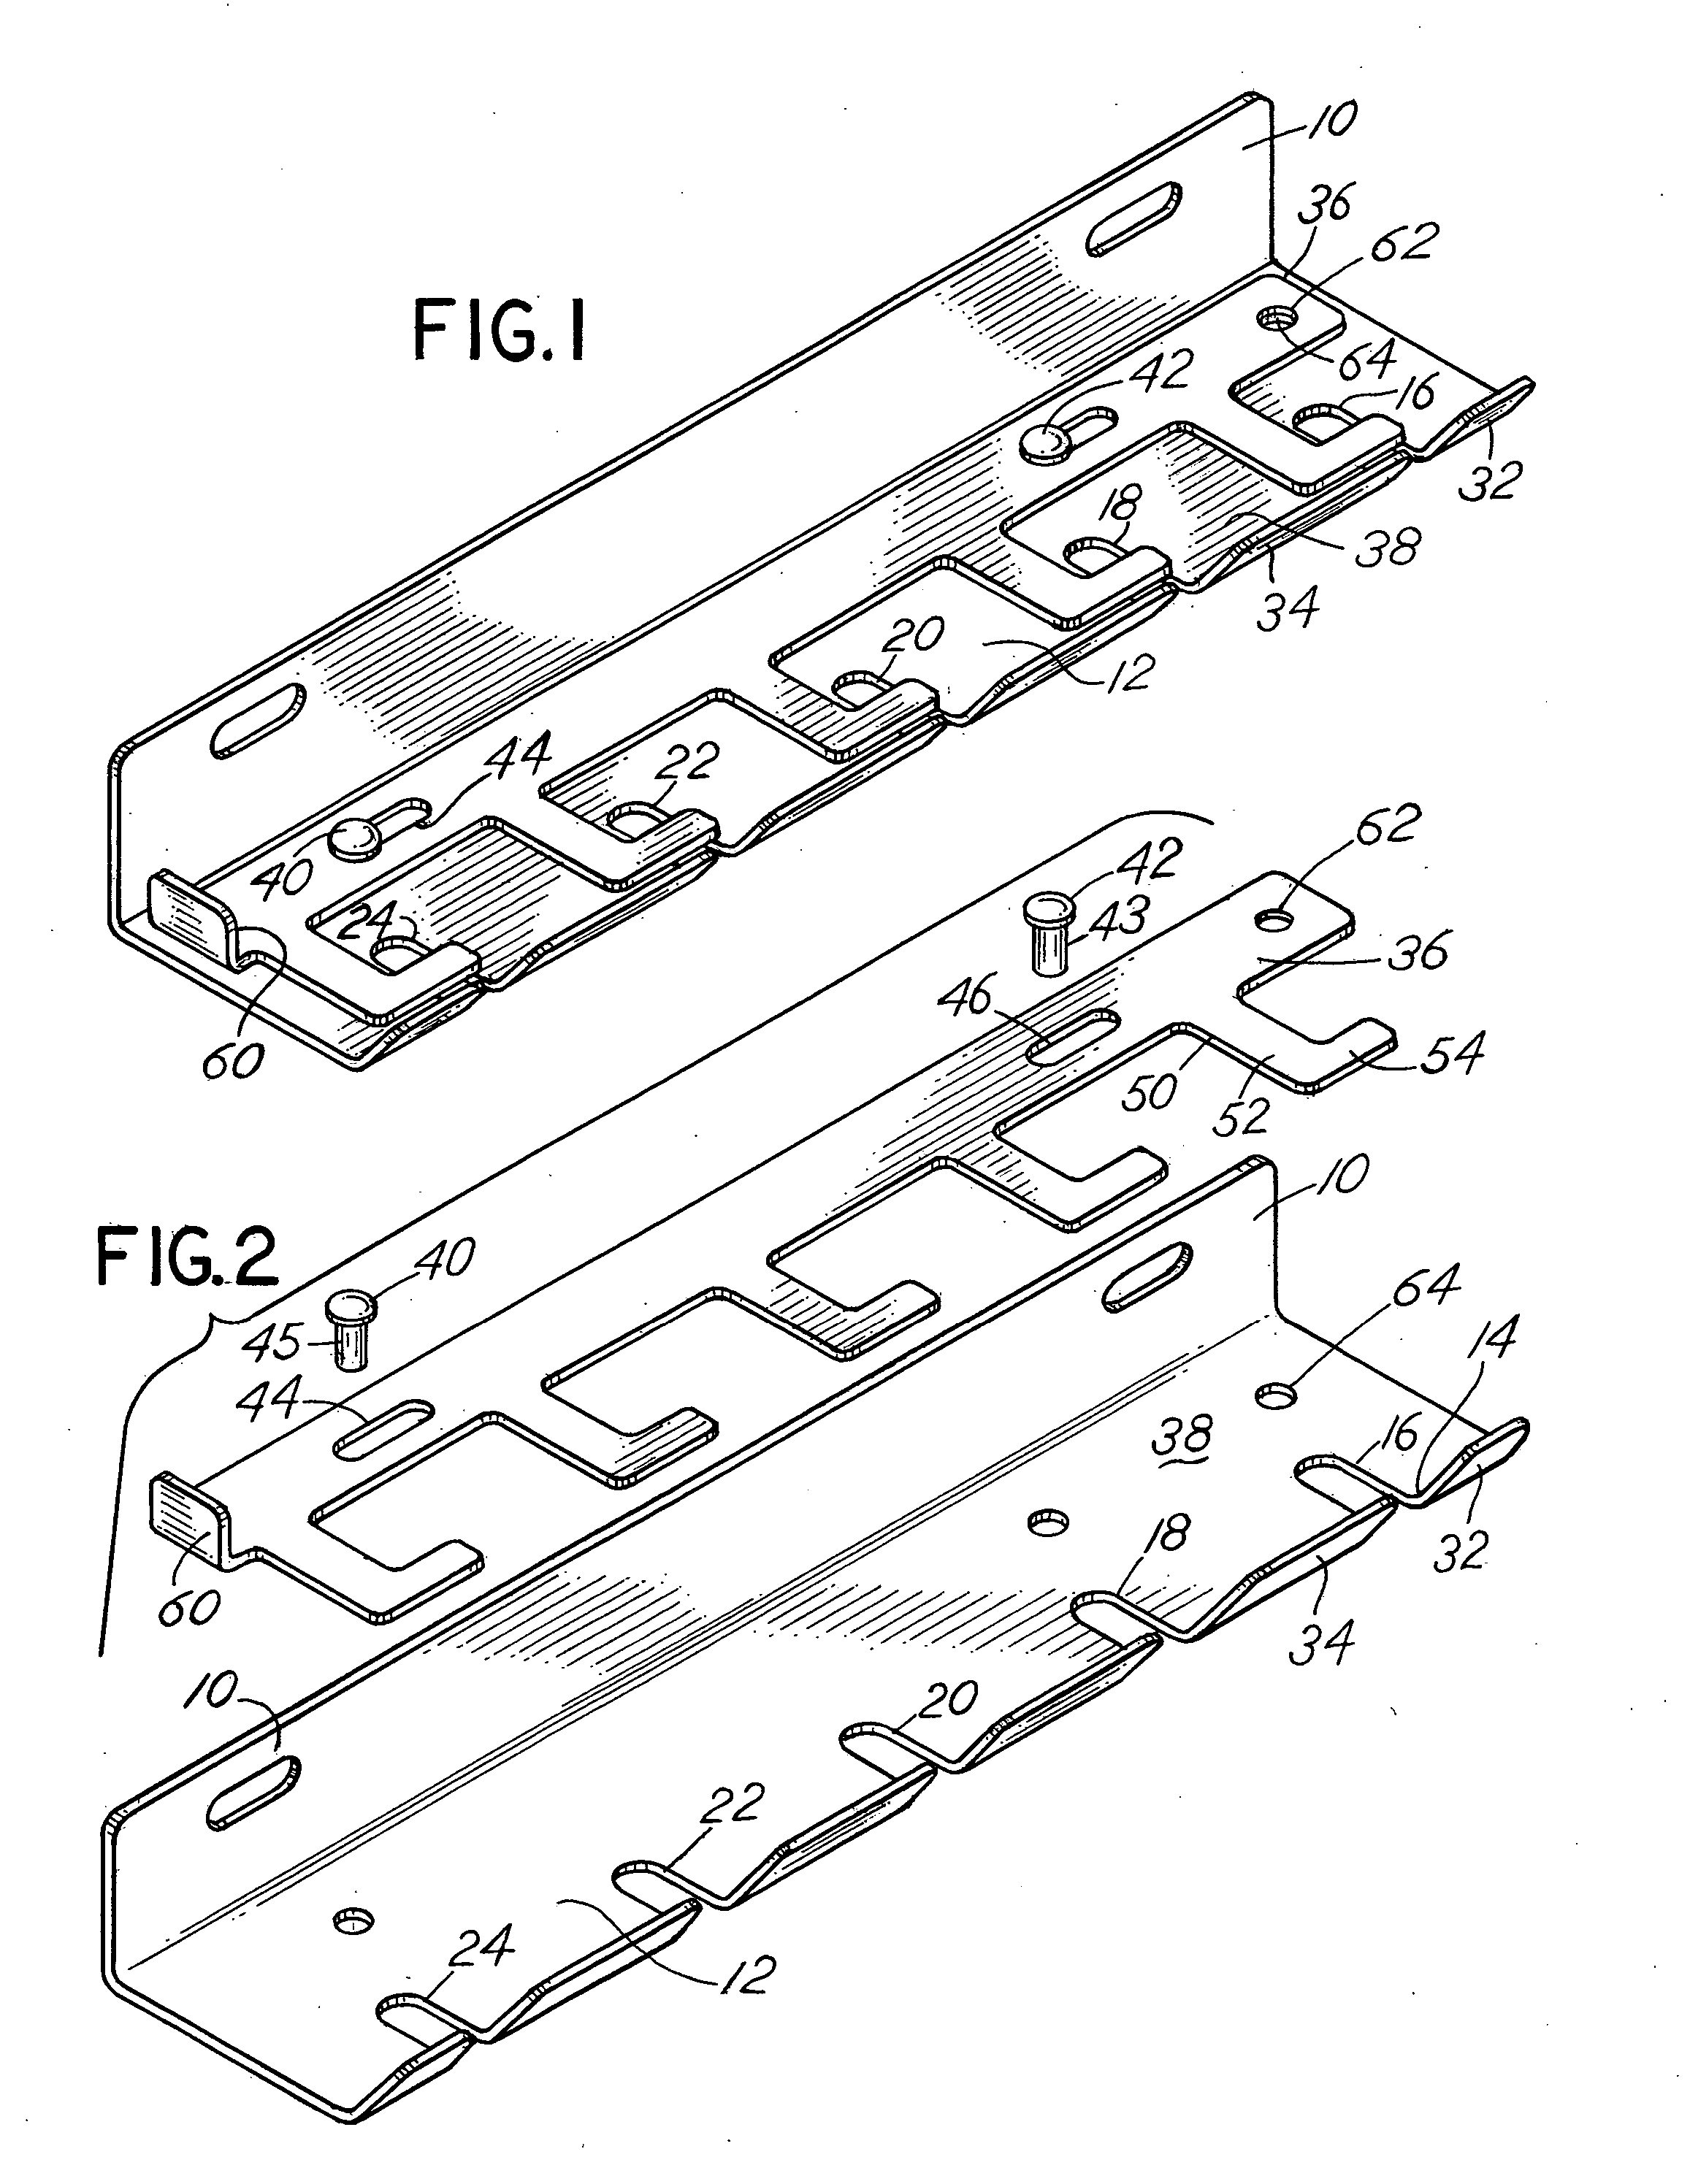 Tool holder with a locking mechanism